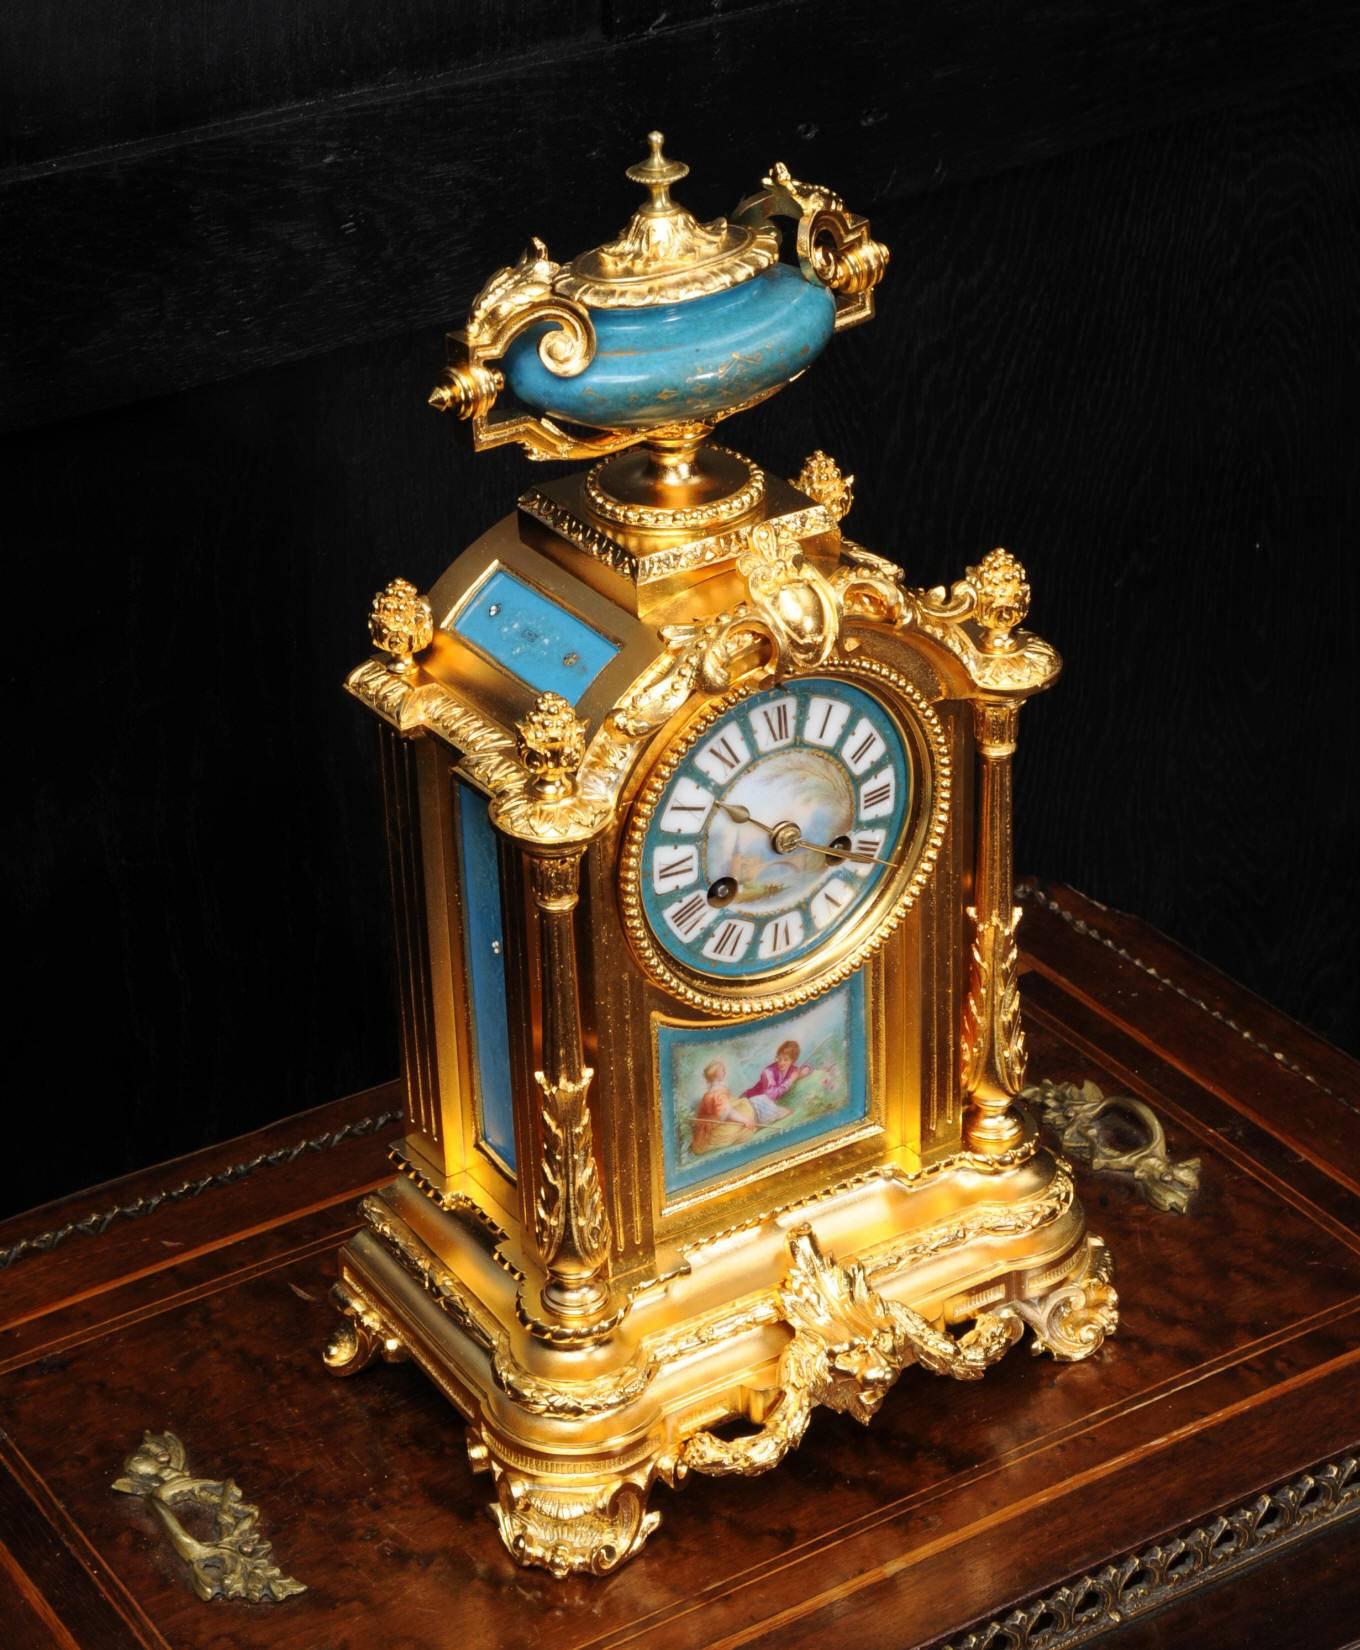 A sumptuous boudoir clock, fine gilding on bronze and lovely turquoise Sèvres style porcelain. It is by the renown clock making firm of Le Roy et Fils and was probably made in Paris and retailed from their Bond Street shop, circa 1880. Porcelain is